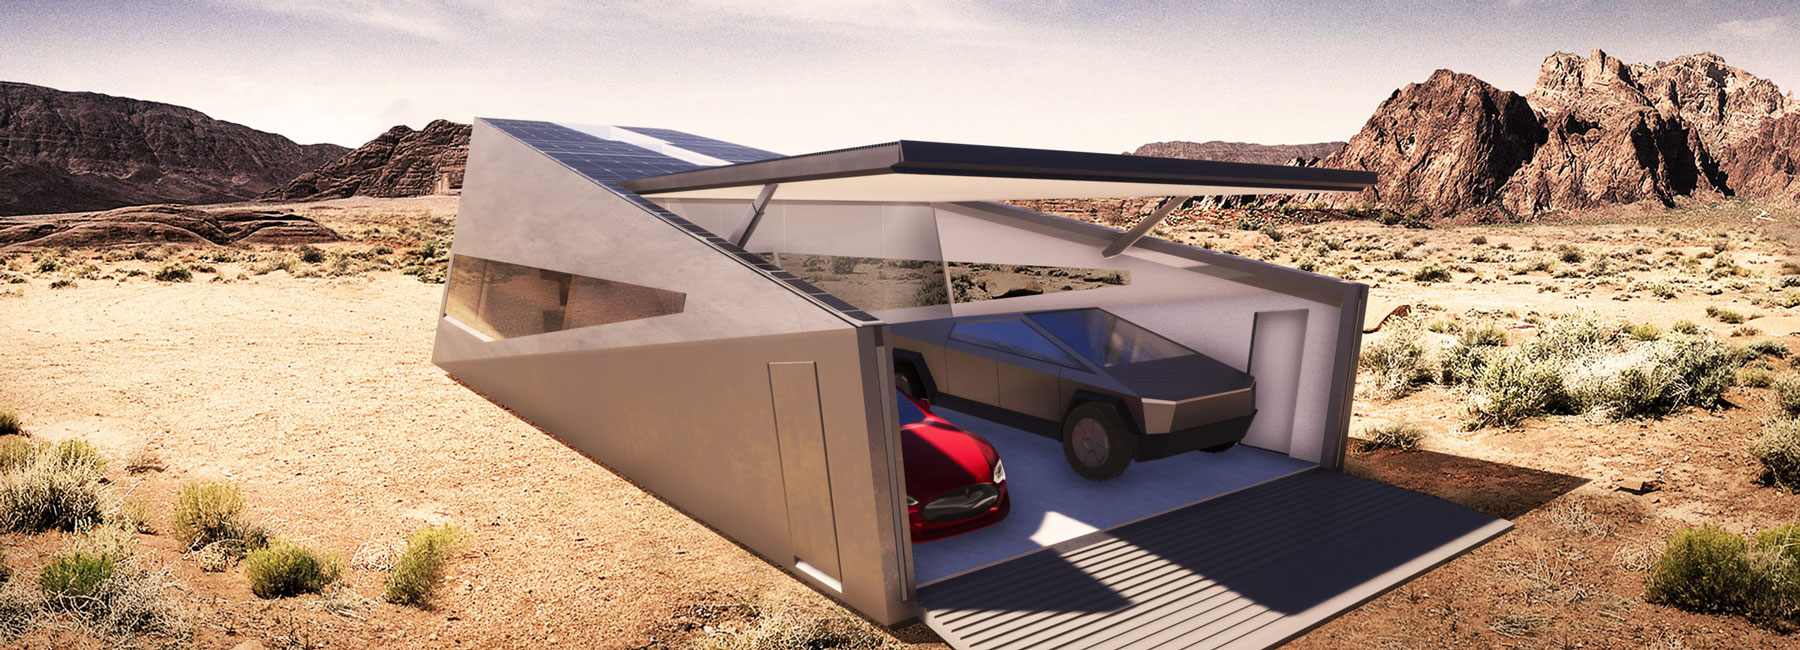 The Cybunker Is An Off Grid Shelter Garage Designed To House